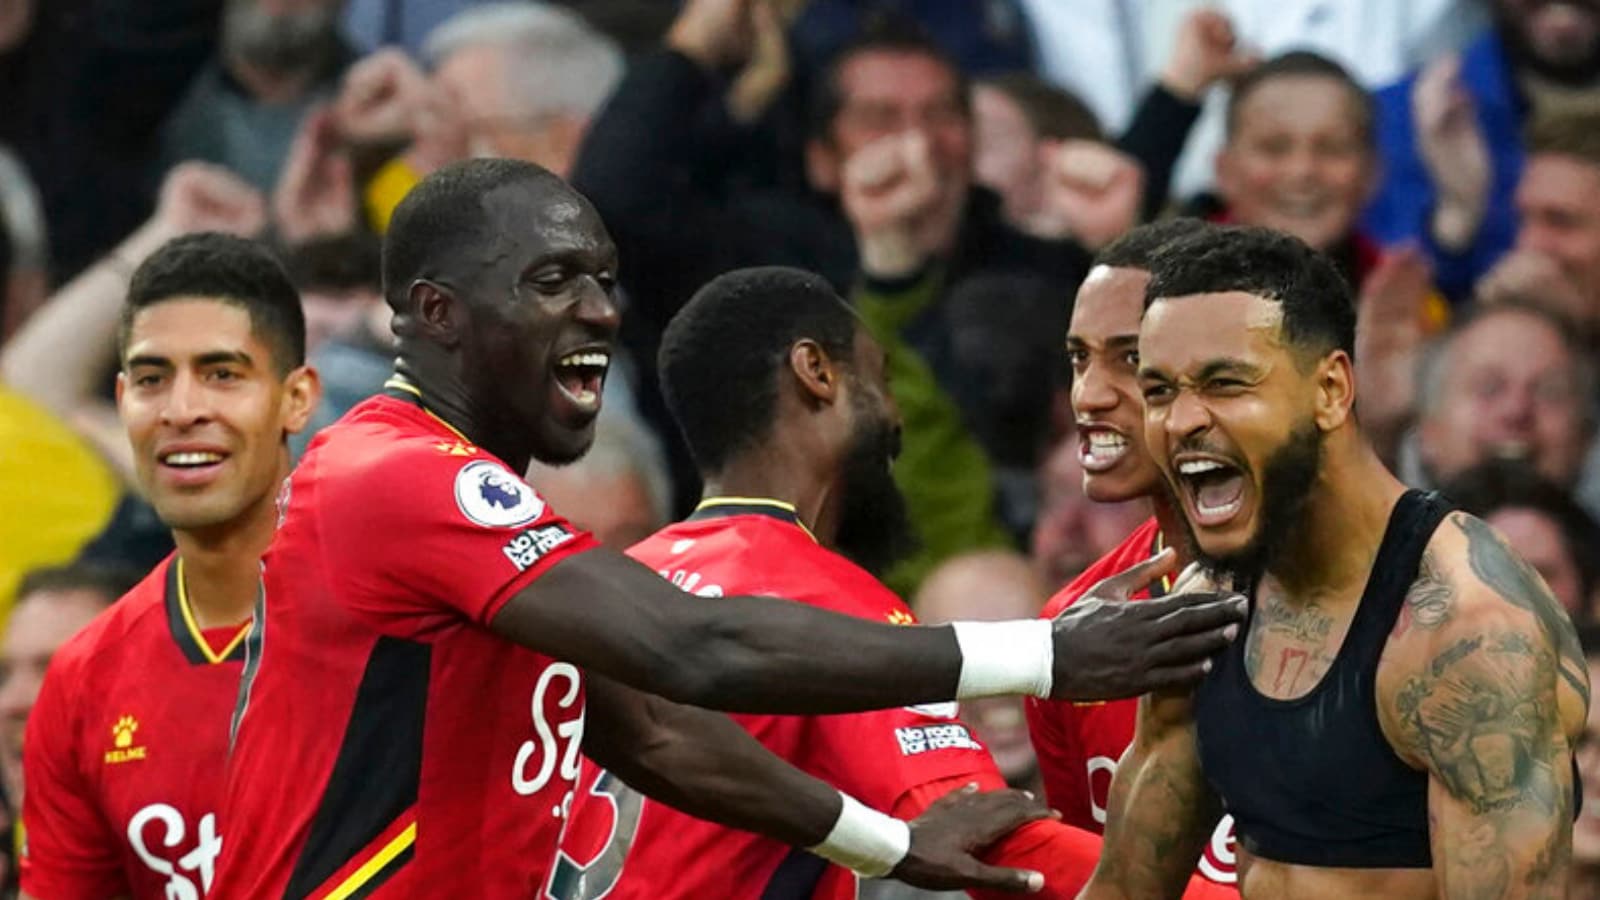 Watford’s Joshua King Stuns Everton with Hat-trick in 5-2 Comeback Win!